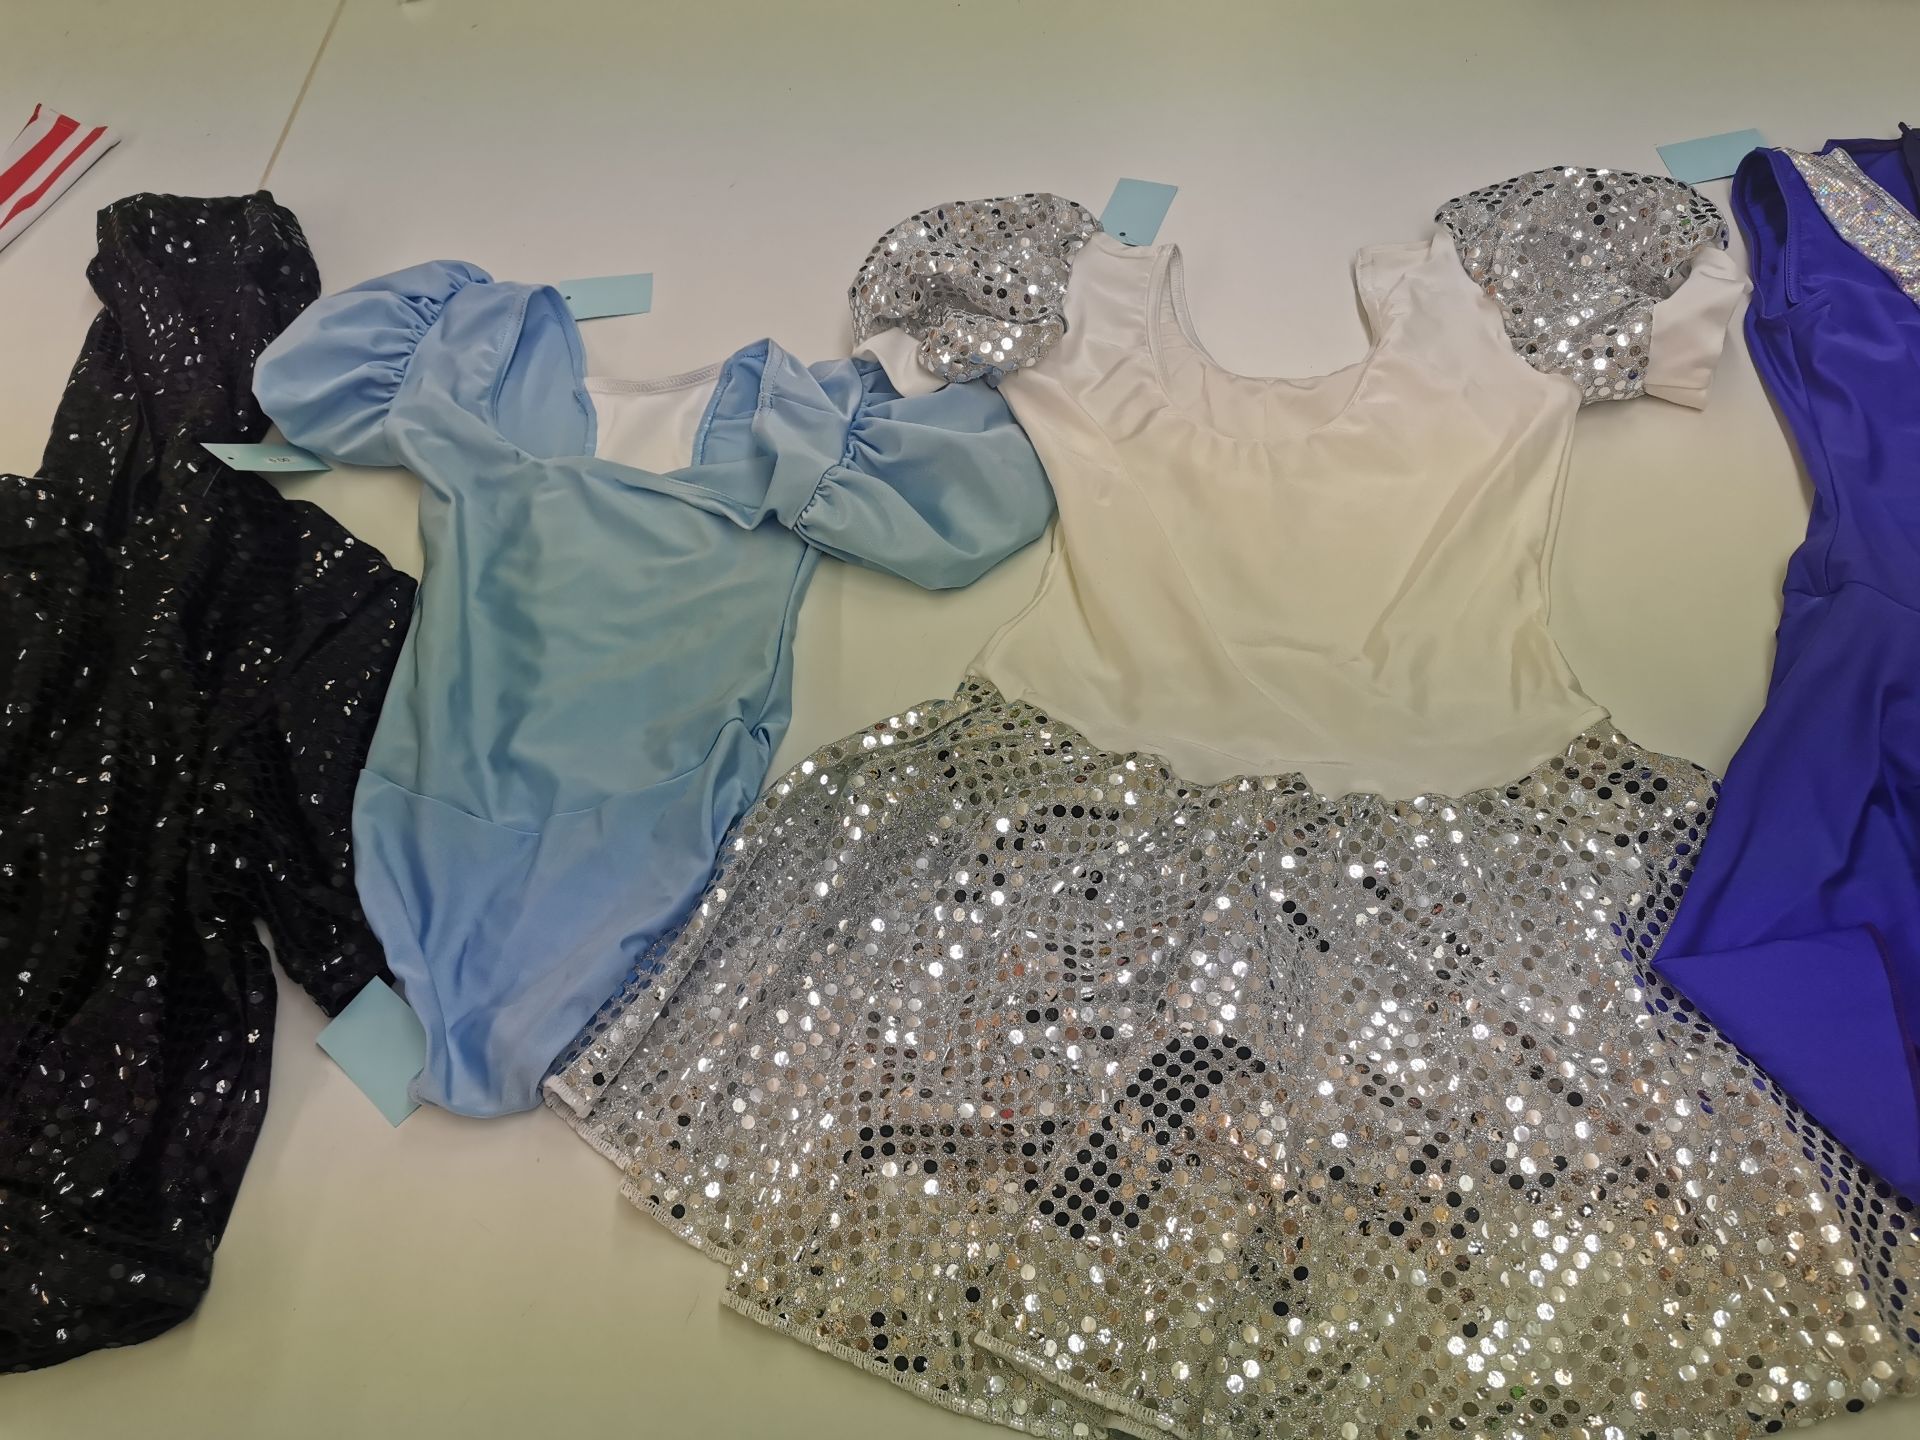 100pc Childrens clothes including dresses,trousers,catsuits,leotards.Various sizes and designs - Image 8 of 8